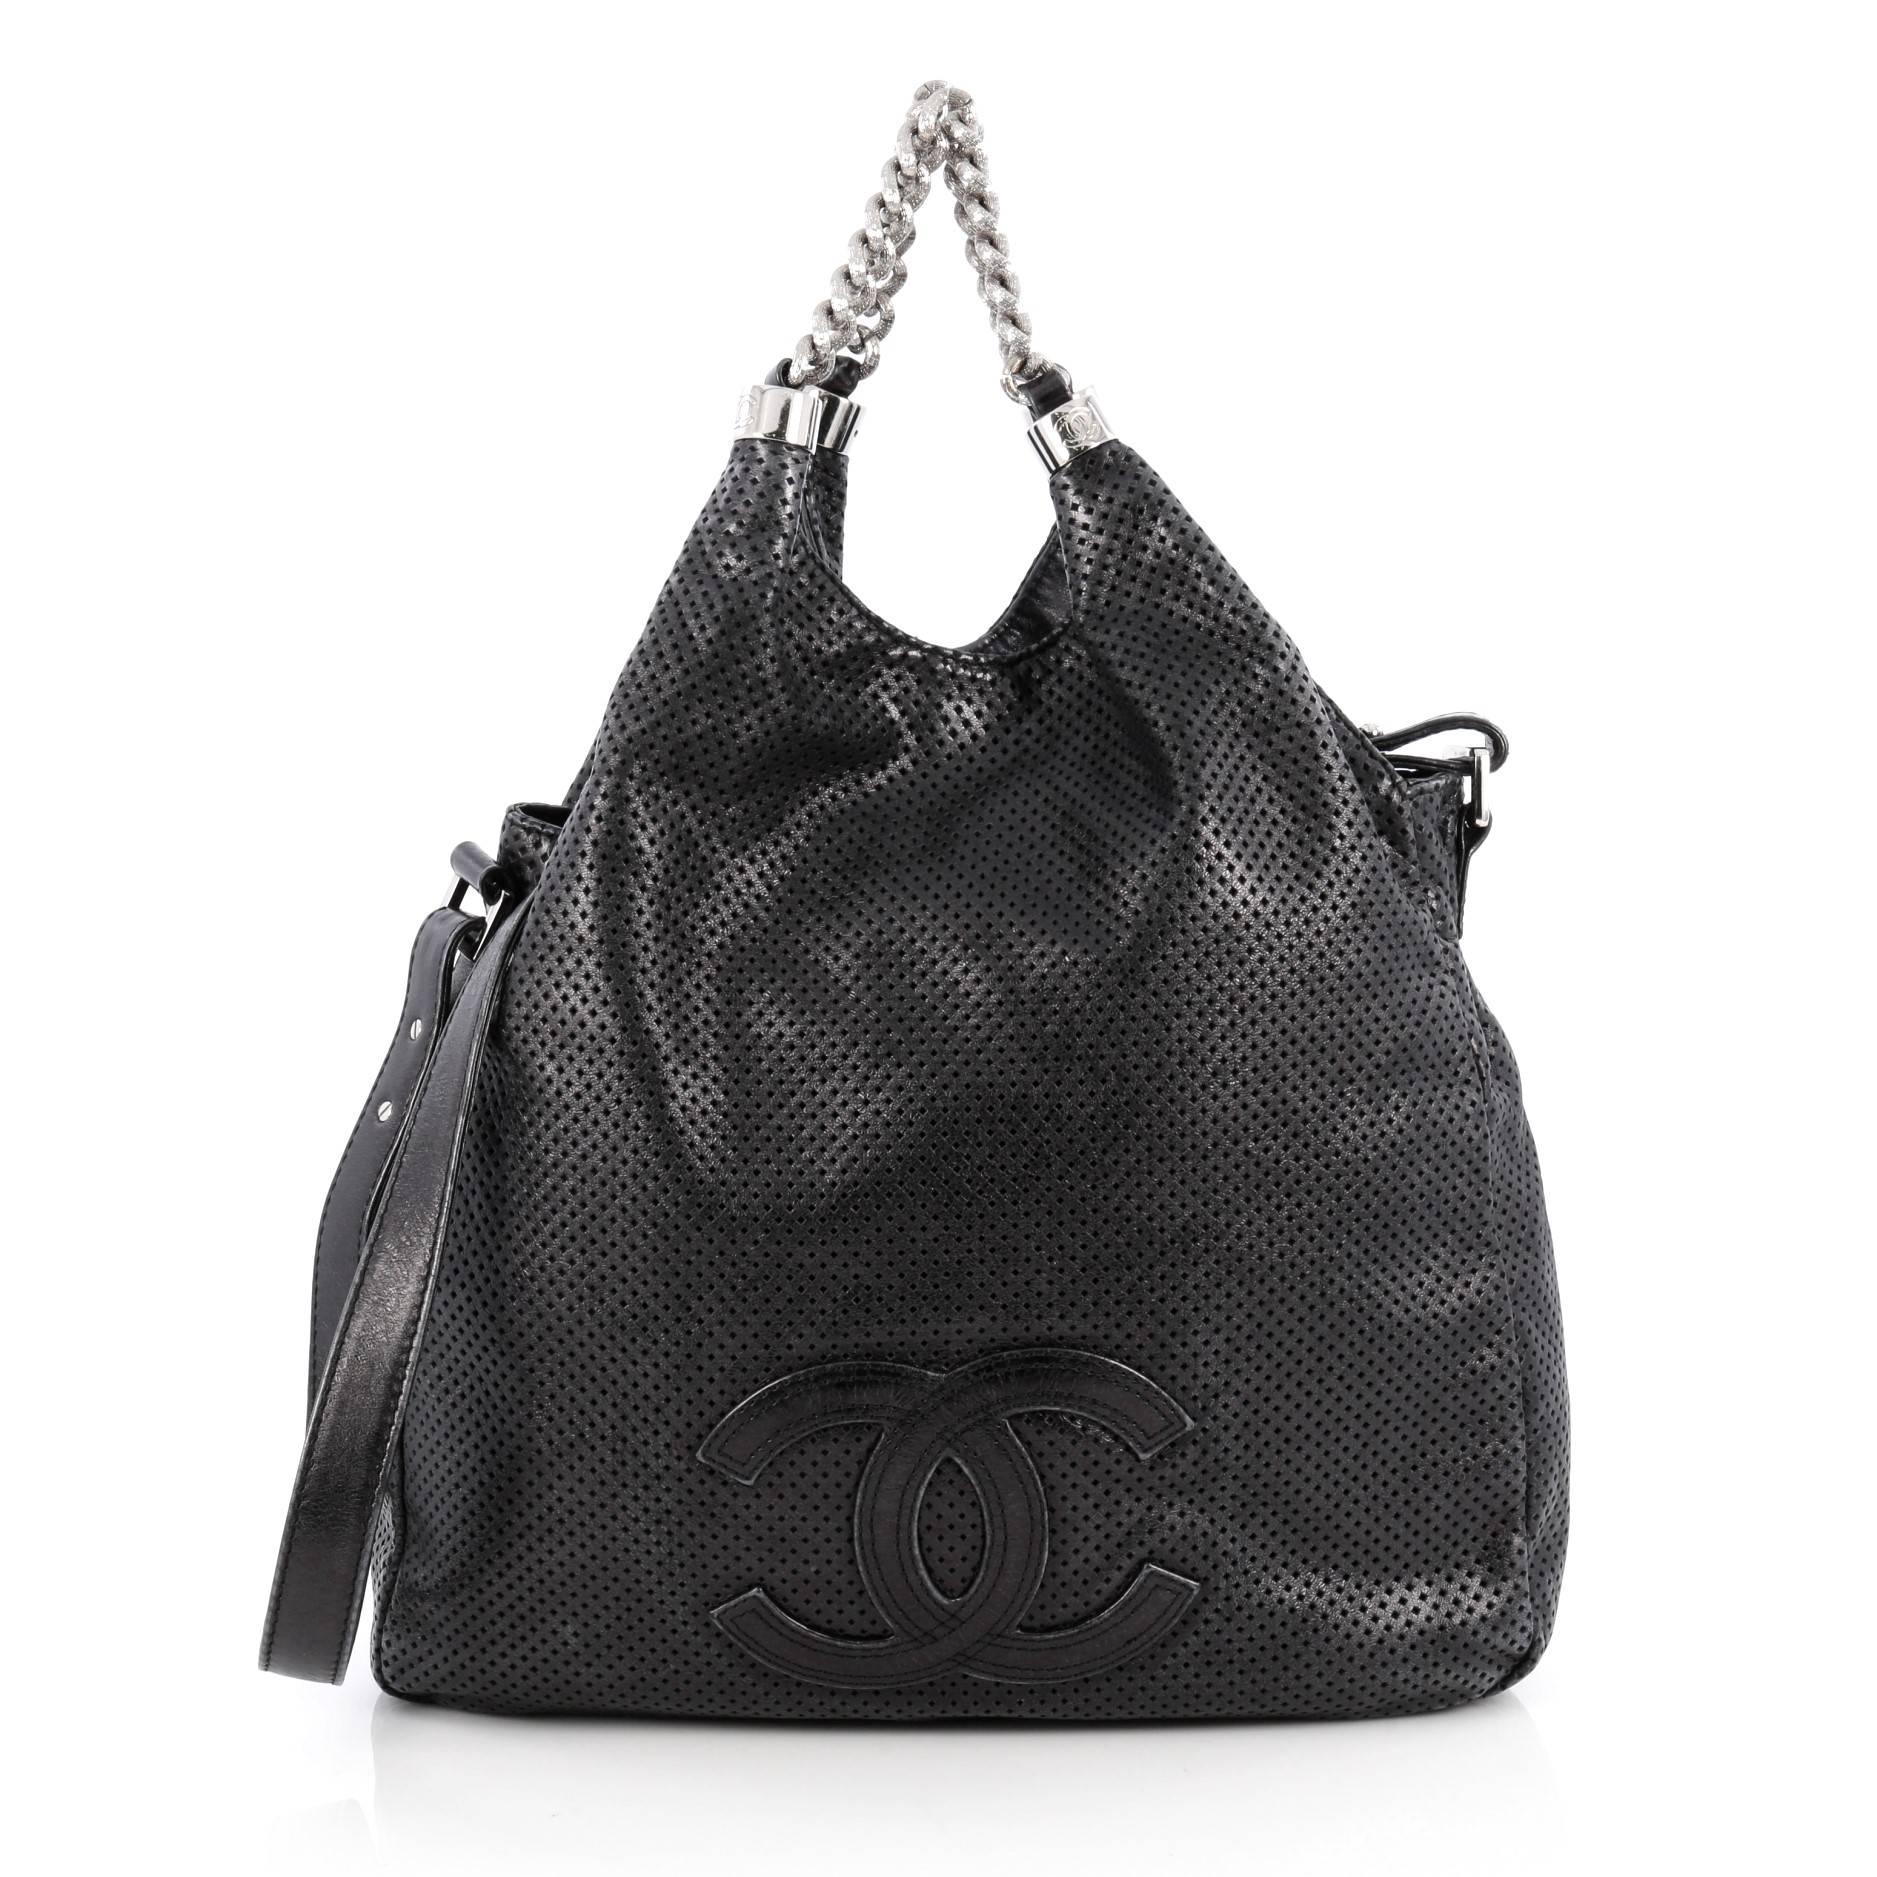 Black Chanel Rodeo Drive Hobo Perforated Leather Large